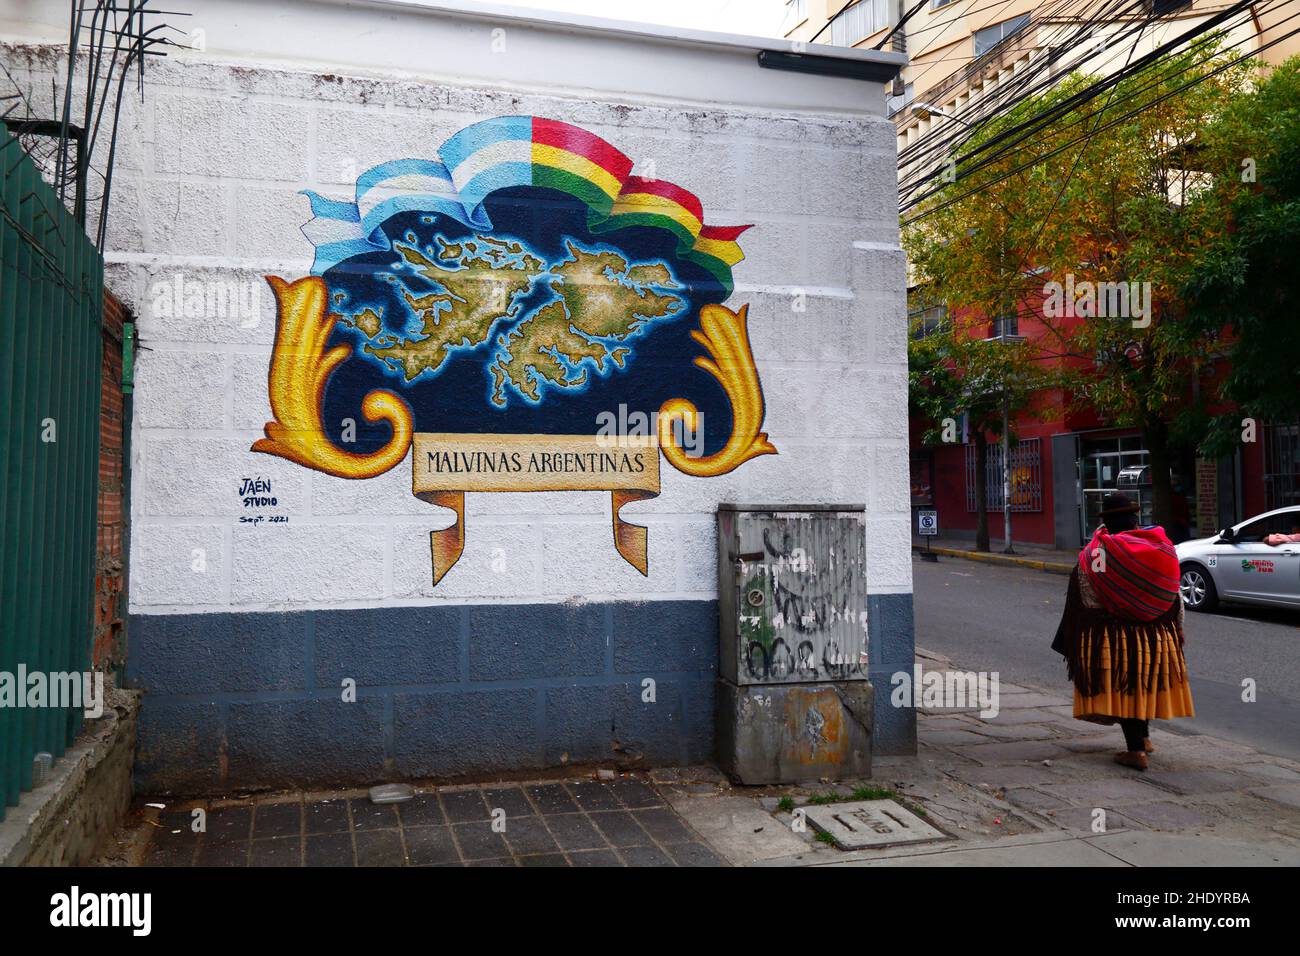 Aymara woman walking past mural on wall of Argentina Embassy showing the Falkland Islands with their Spanish name Malvinas, La Paz, Bolivia Stock Photo